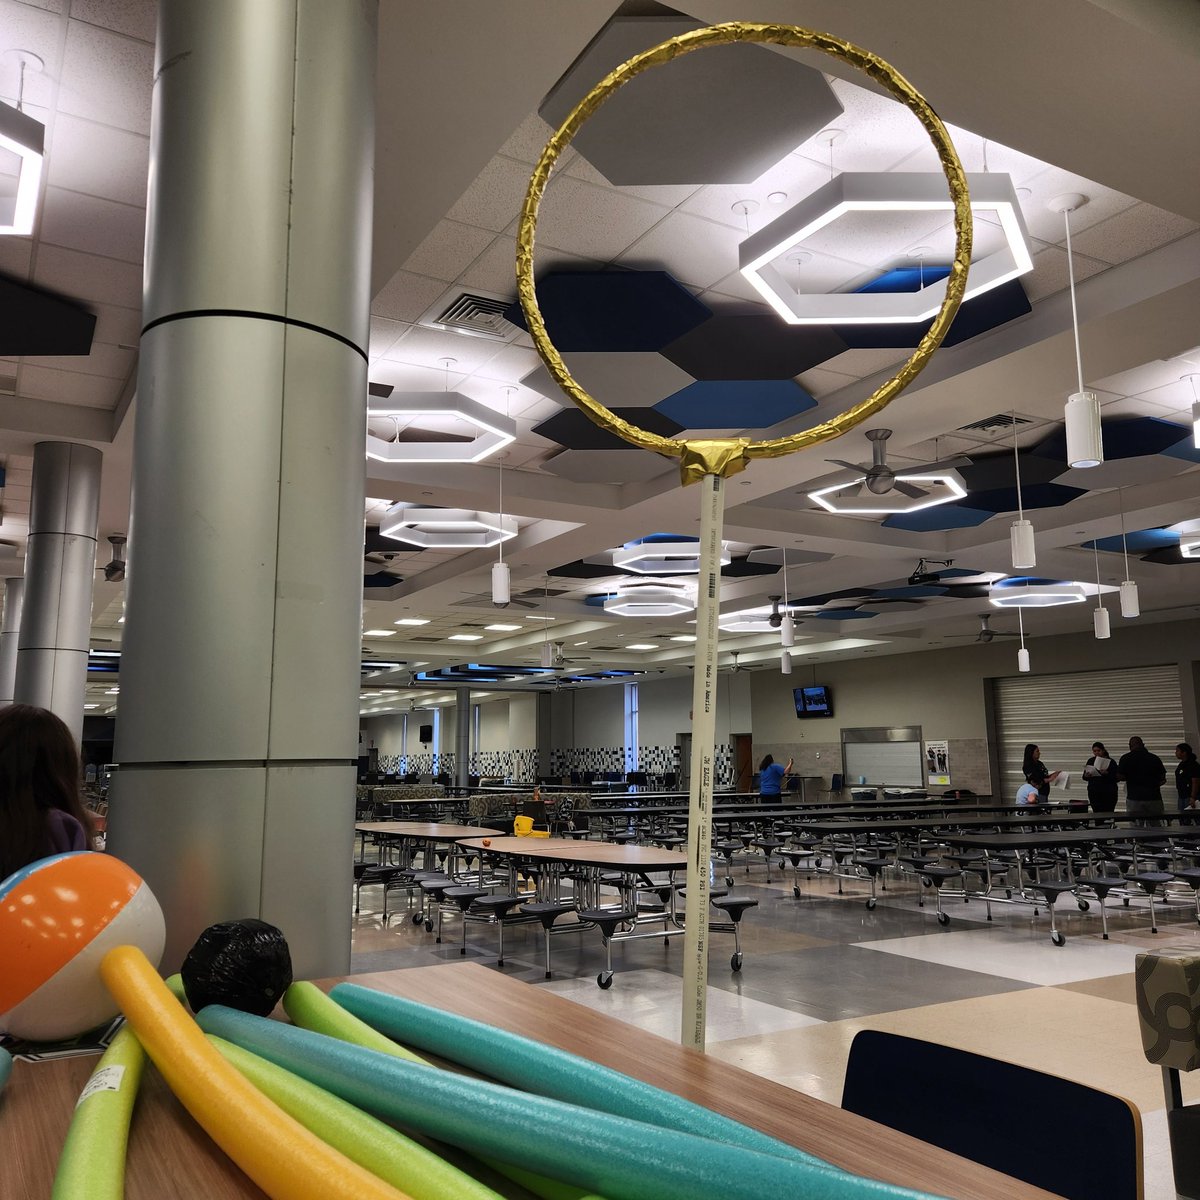 Stopped by @NimitzVikings to check out their library Hogwarts Night! So many cool things! @IrvingLibraries getting sorted, Quidditch and friendship bracelets!